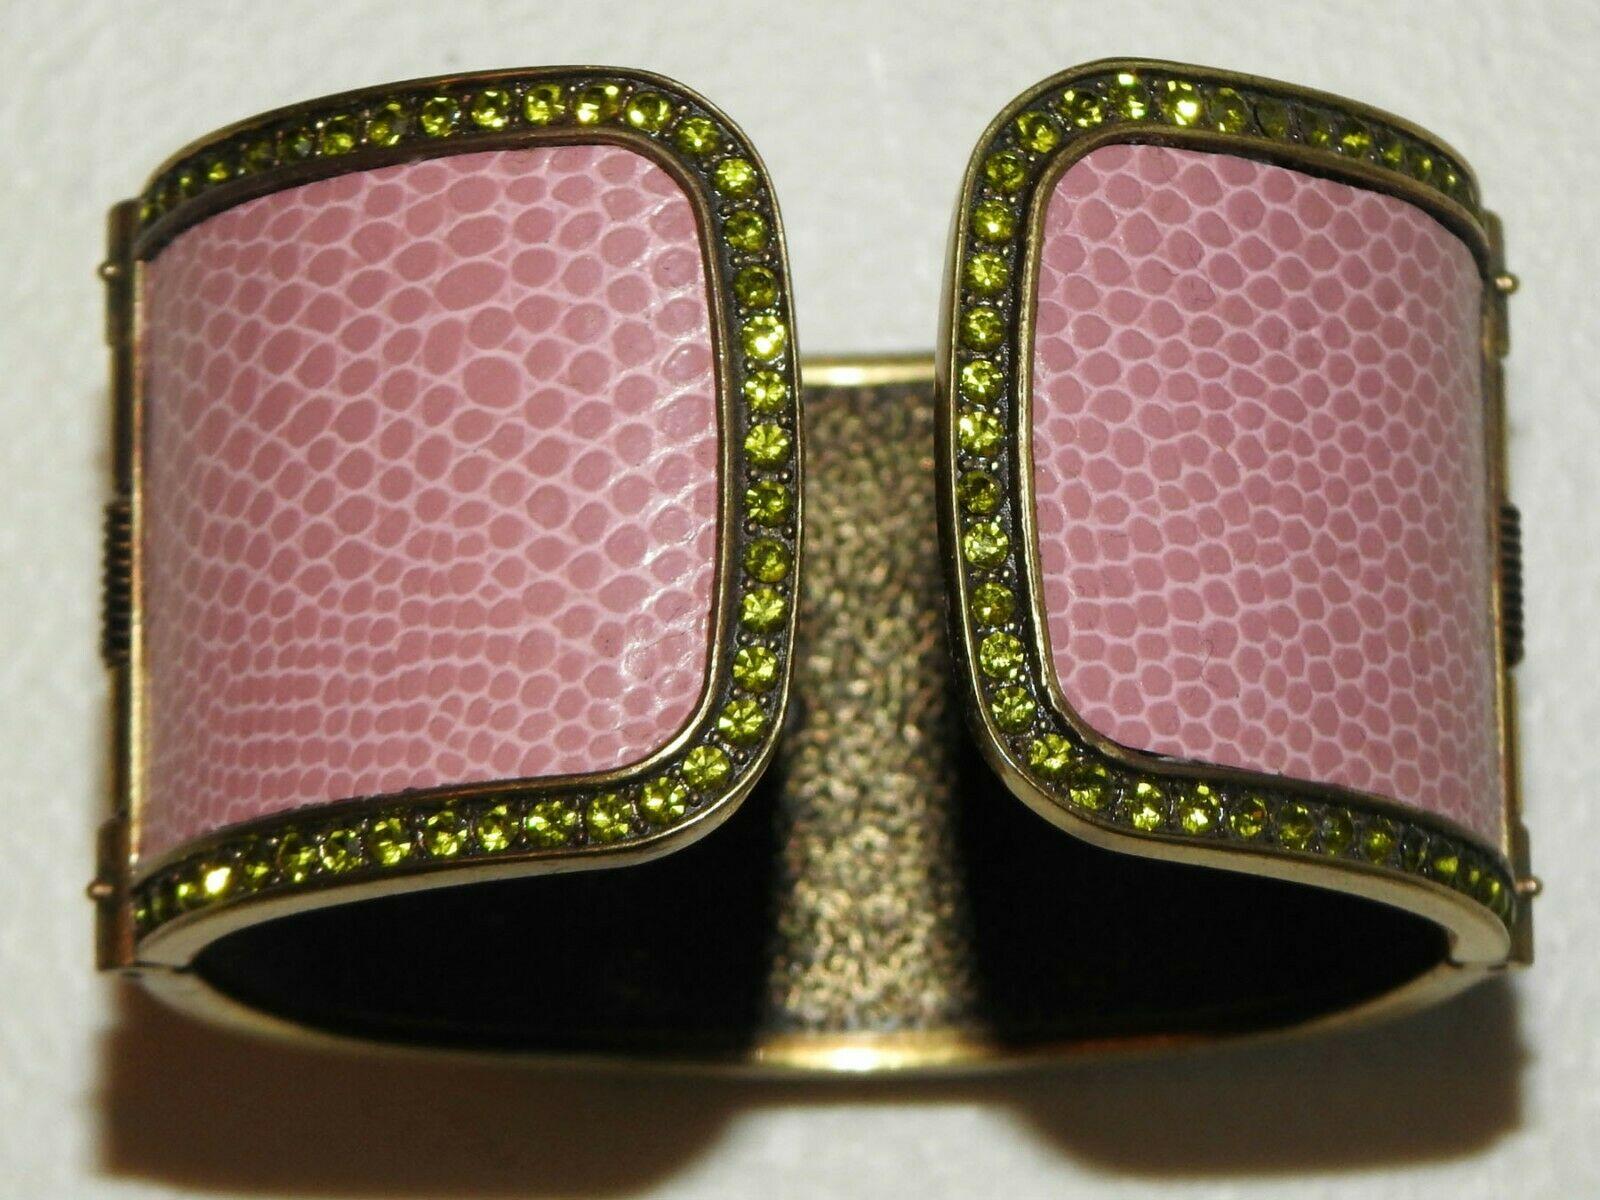 Simply Beautiful Double Hinged Pink Enamel Cuff Bracelet, outlined in Crystals and center embellished with multi-colored Swarovski Crystals in an ornate design; over embossed Leather. Measuring approx. 1.63” wide x 6.5” inside Circumference x  0.50”